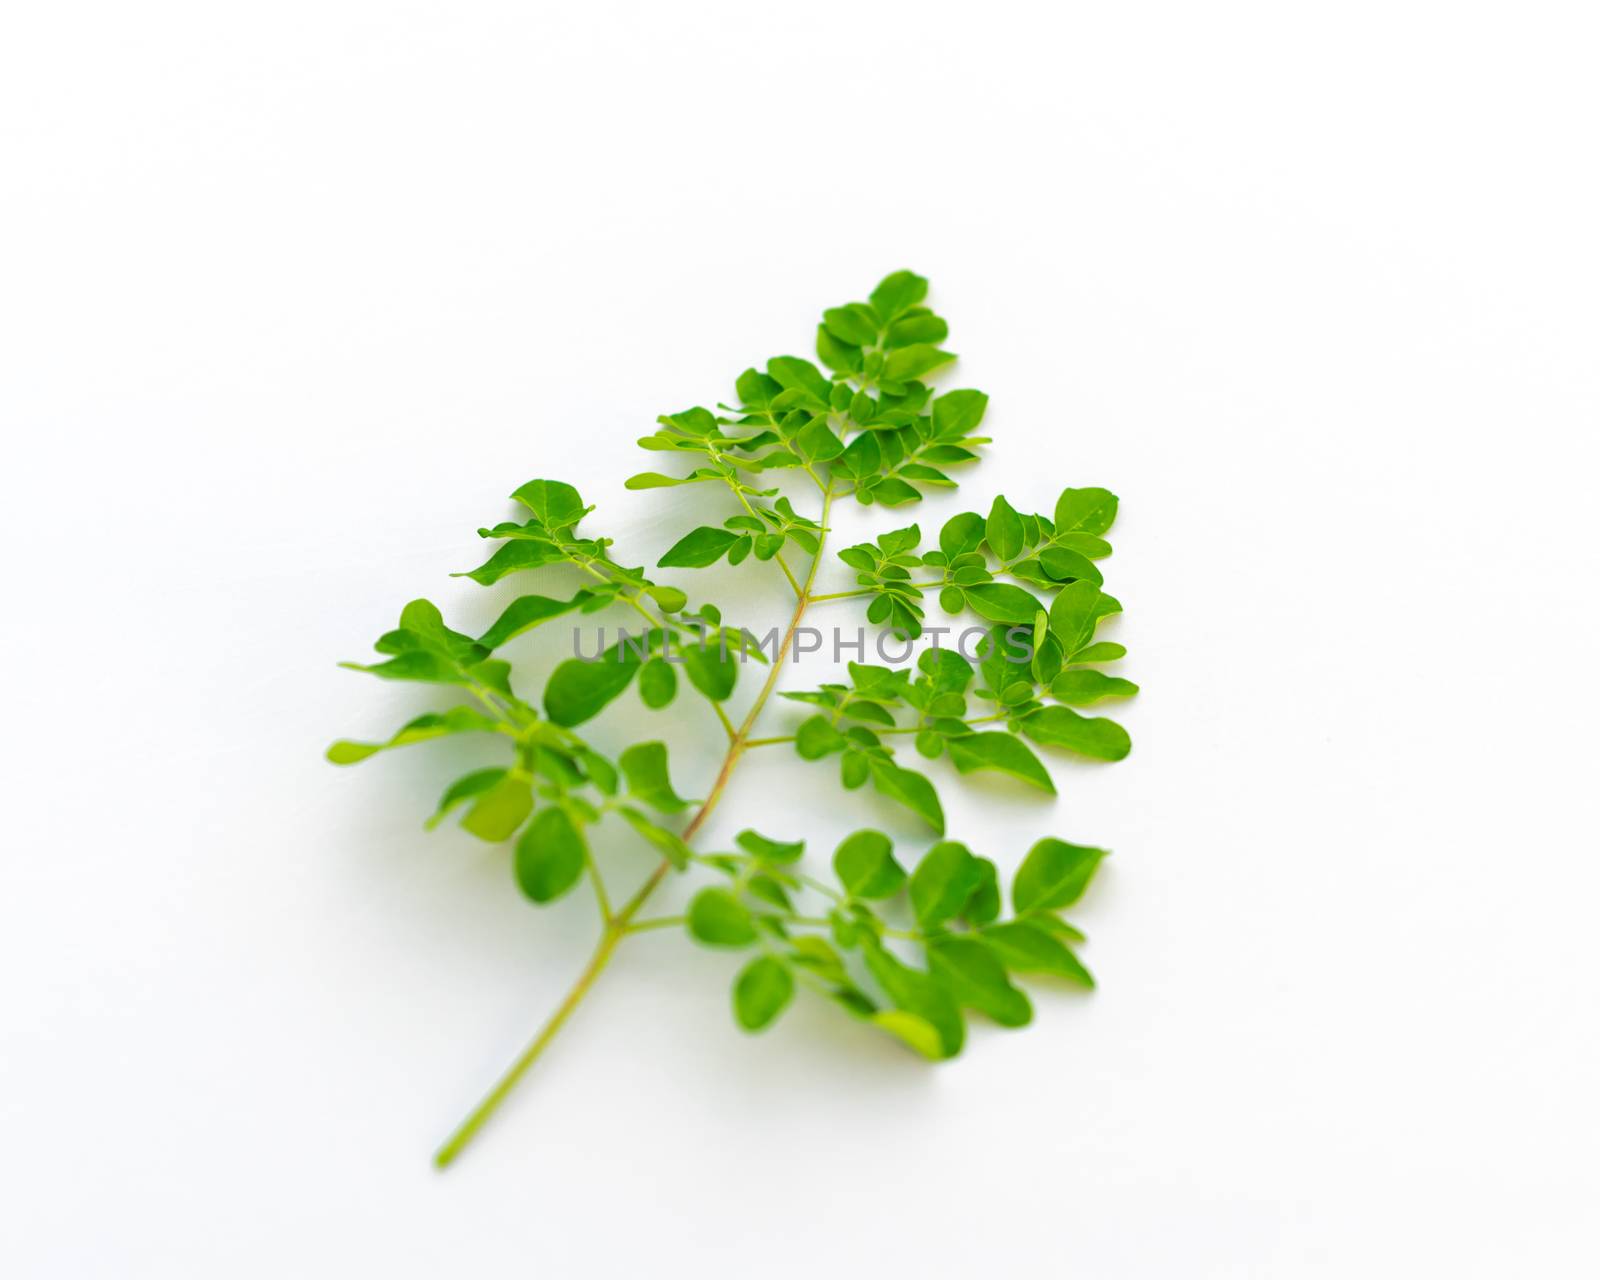 Homegrown Moringa oleifera leaves isolated on white background. Native to tropical, subtropical regions of Asia. Common names include drumstick, Malunggay, horseradish or benzolive tree